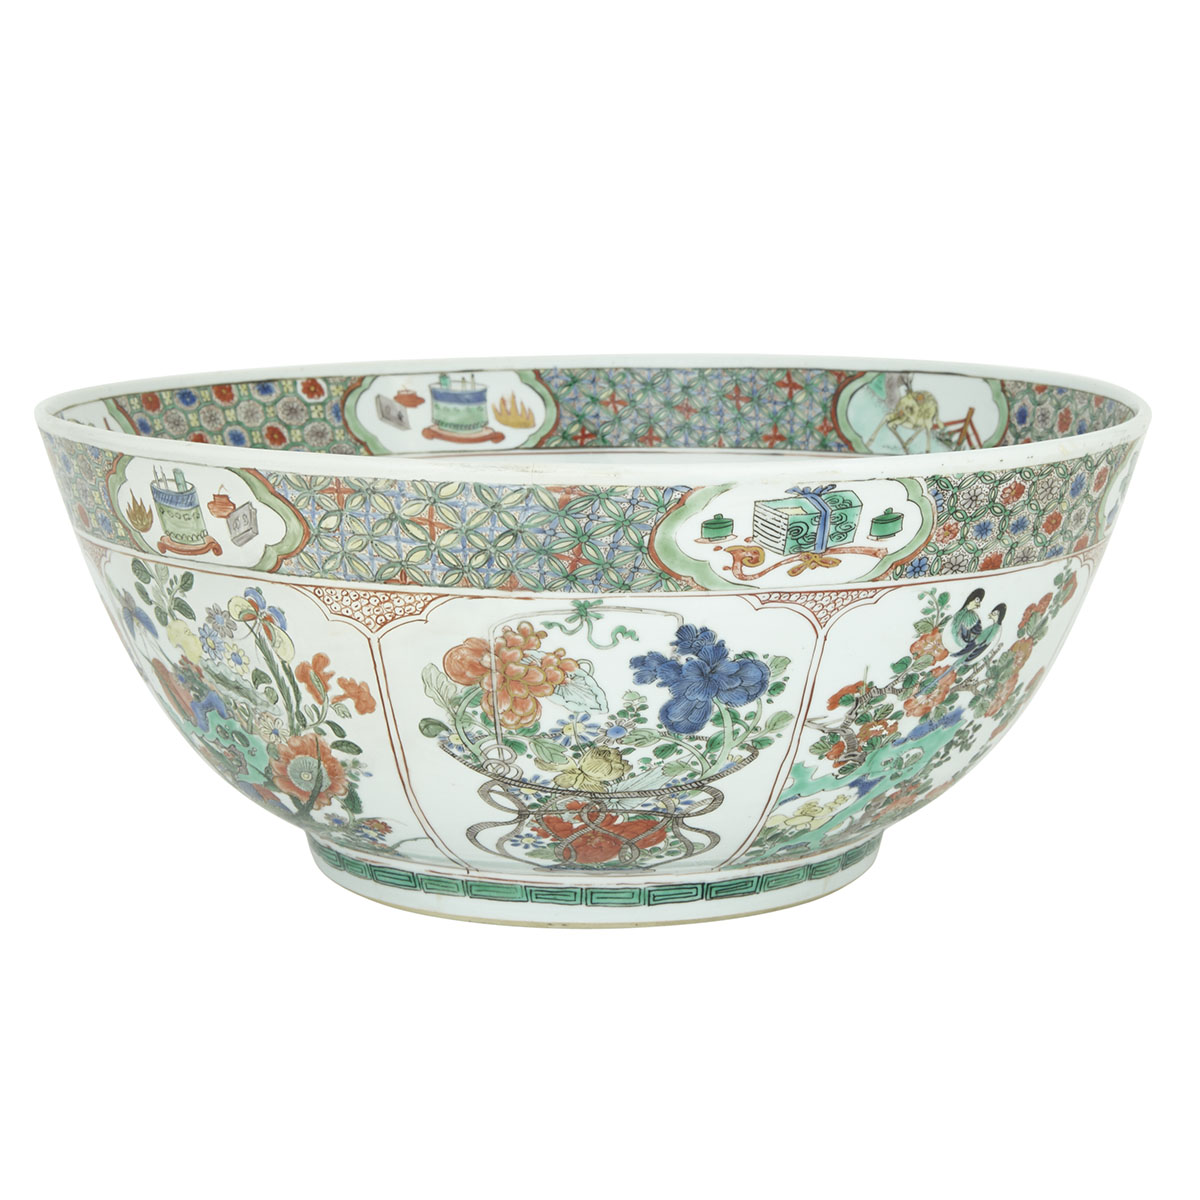 A Massive Famille-Verte Wucai Punch Bowl, Mark and Period of Kangxi (1662-1772)